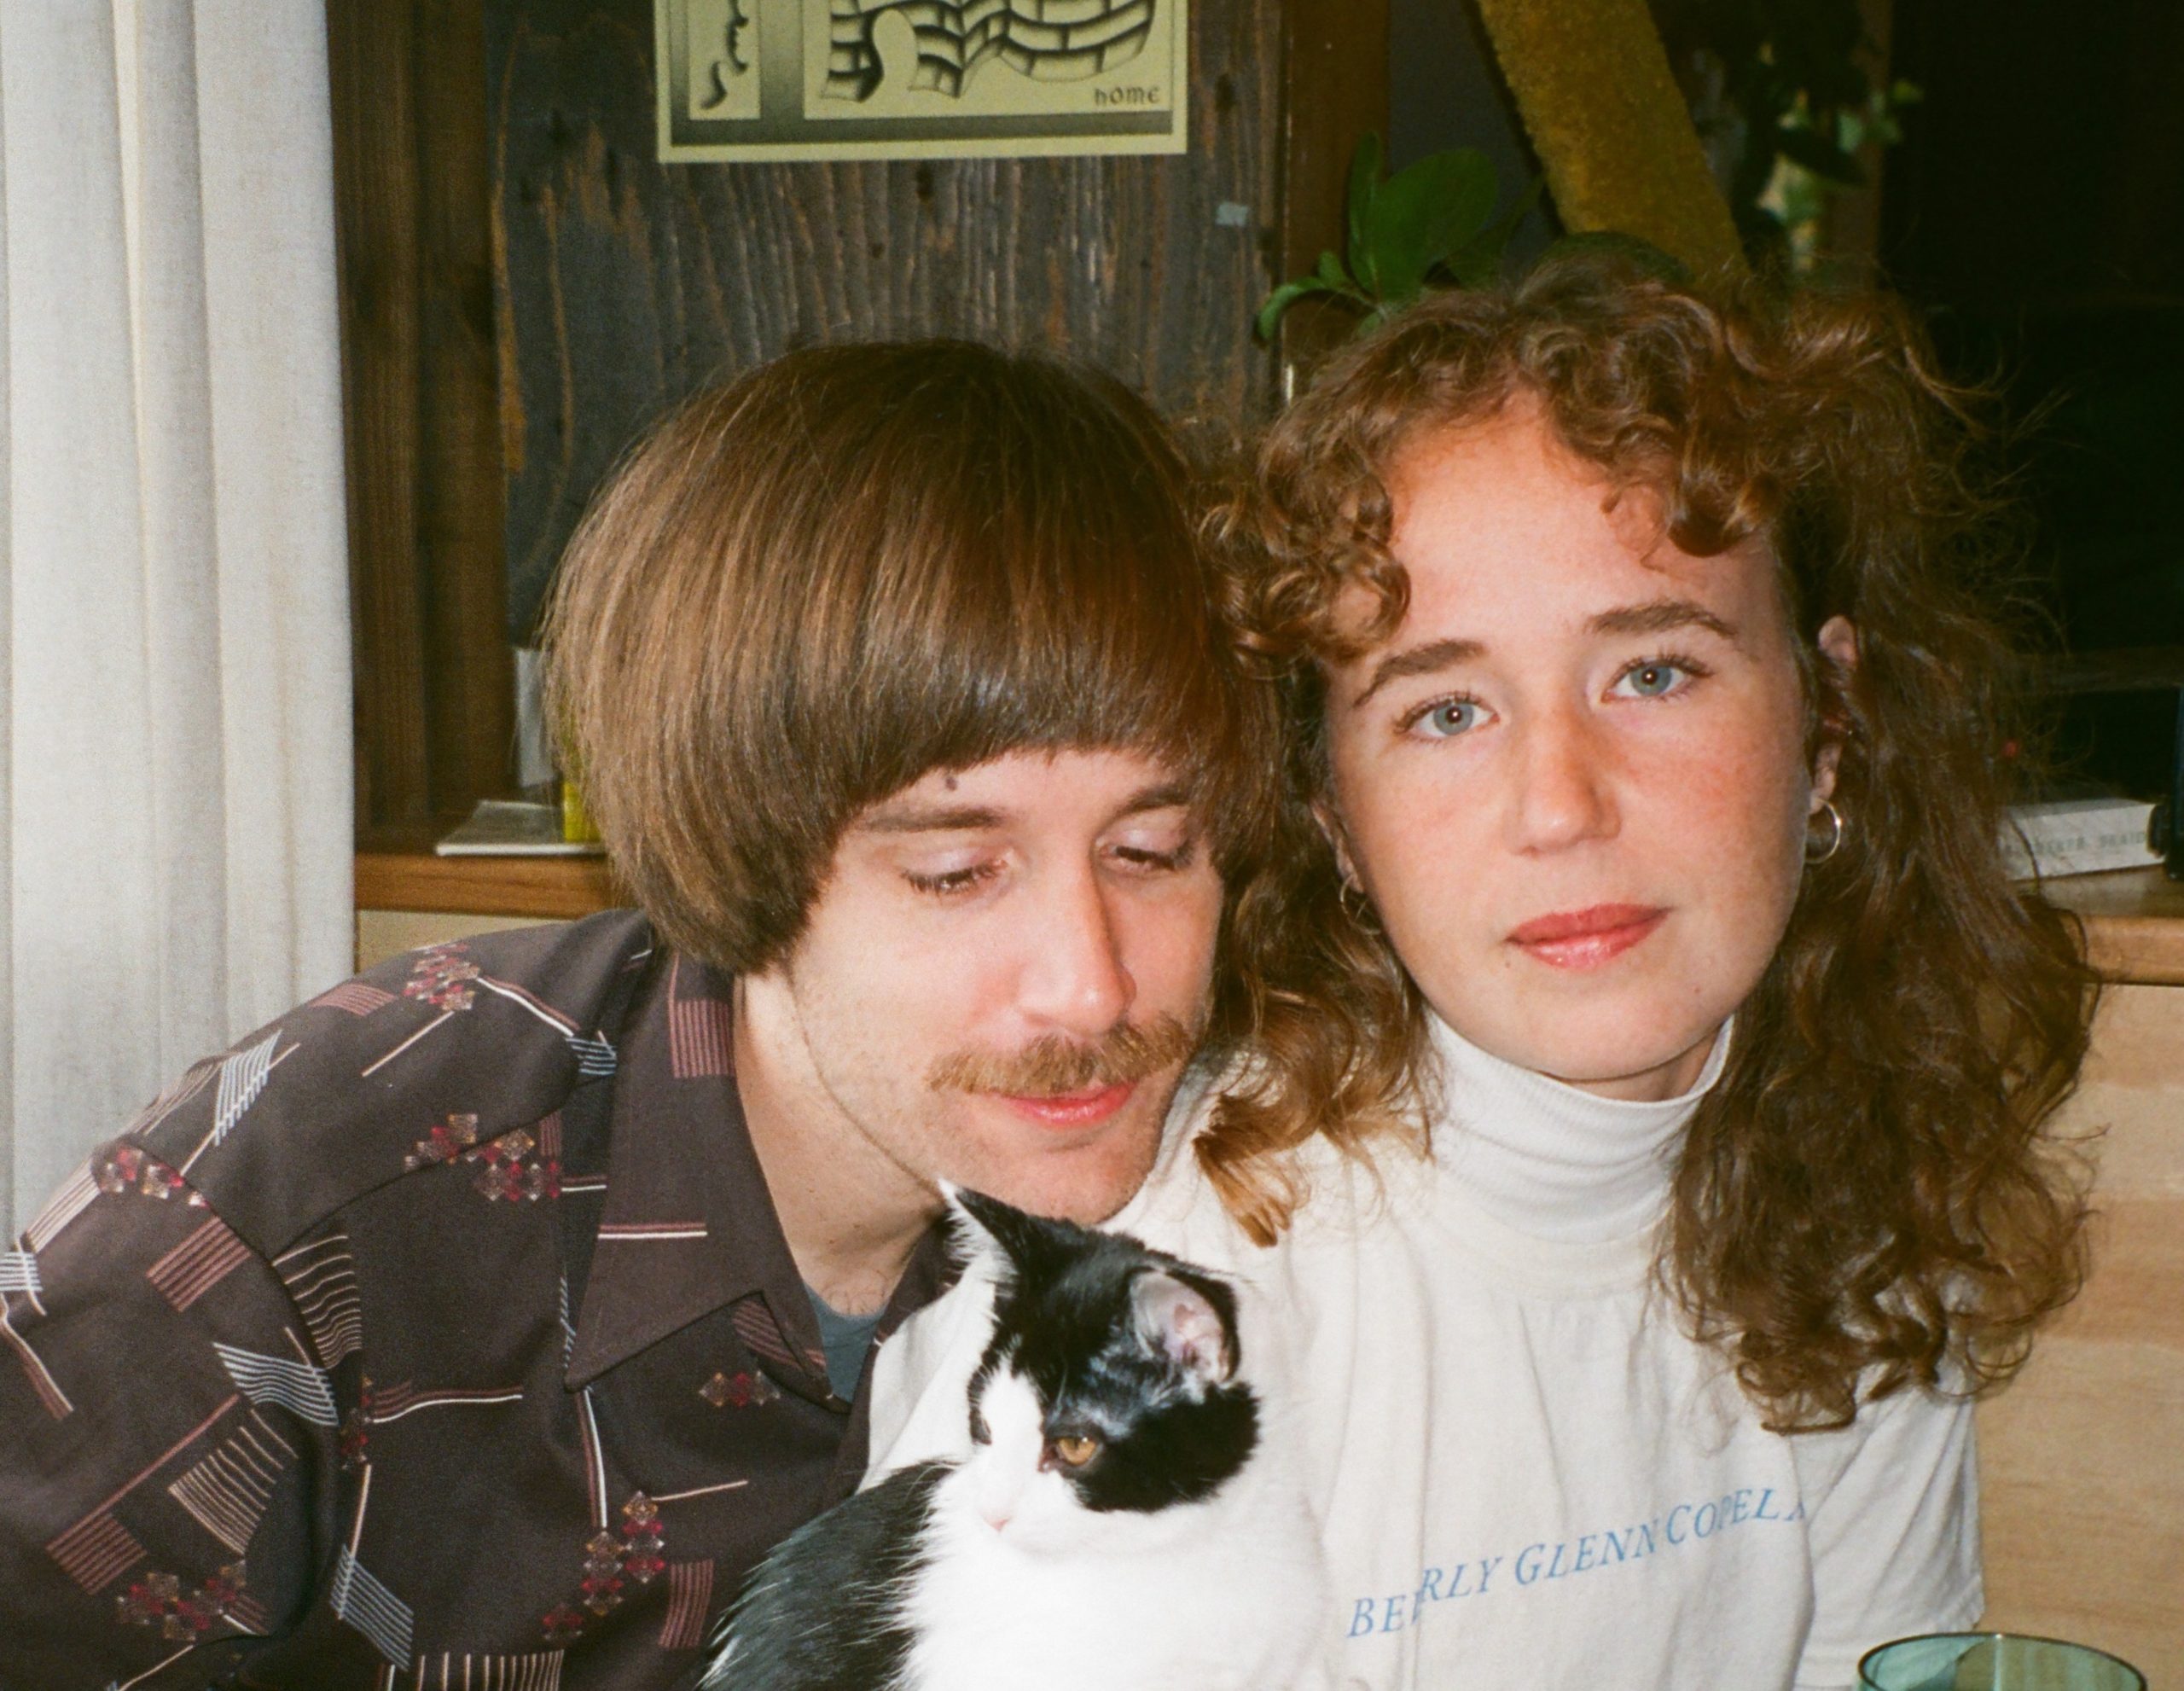 Listen to Doohickey Cubicle’s “Sign Here” remix by Blue Hawaii; debut LP out this Friday